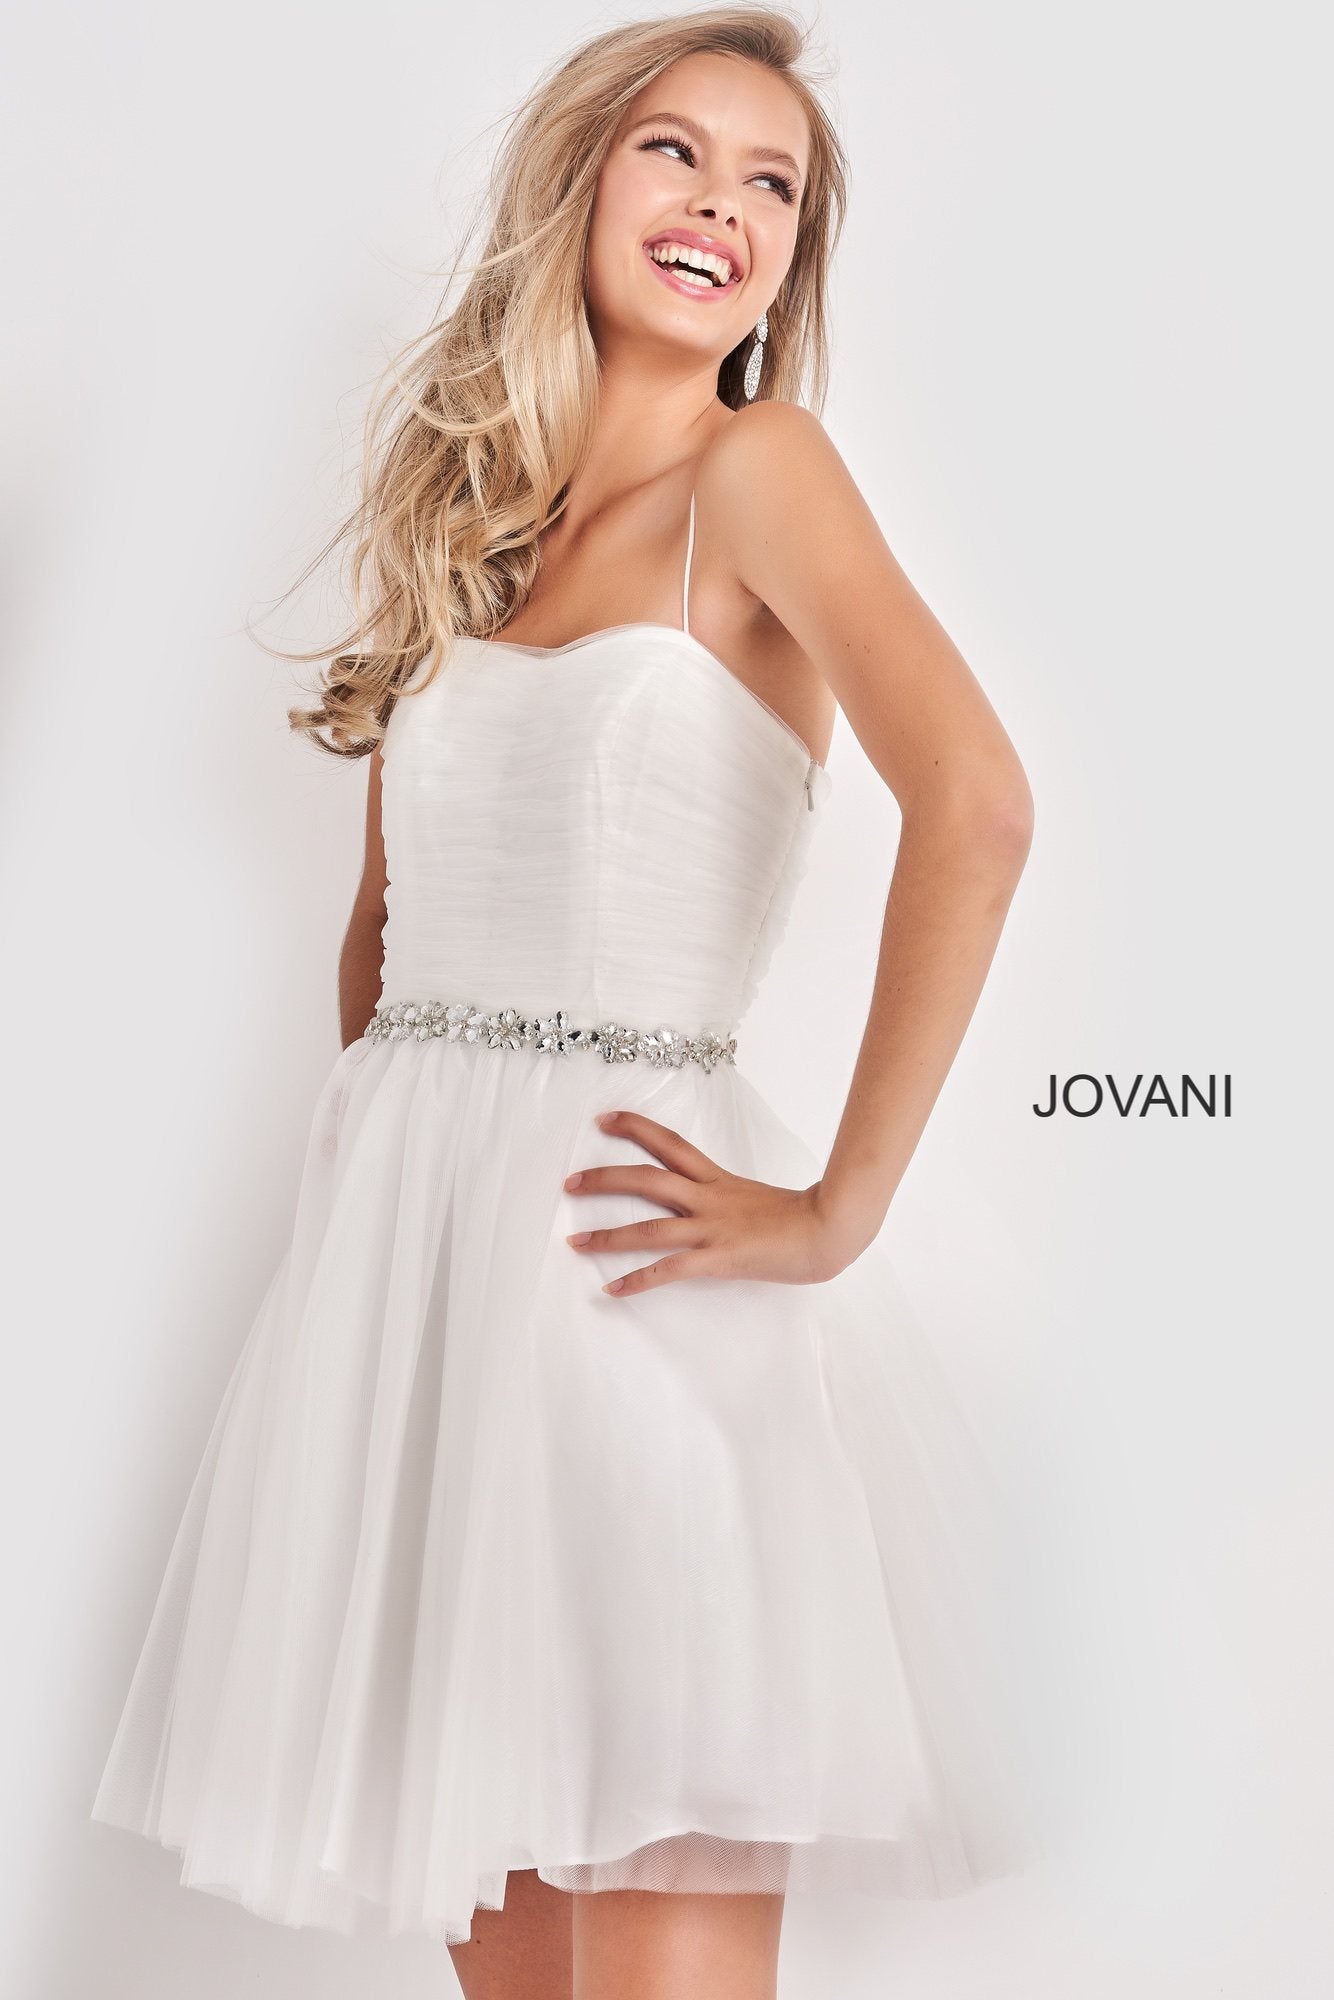 Jovani Kids k4761 is a short Girls Party Dress, Kids Pageant Gown & Pre Teen Formal Evening Wear gown. This Short Fit & Flare Girls Dress Features a sweetheart neckline with spaghetti straps. Pleated Fitted bodice with a Crystal Embellished Waist belt. Flared Tulle Short Skirt.  Available Girls Sizes: 8, 10, 12, 14  Available Colors: Light Blue, Off White